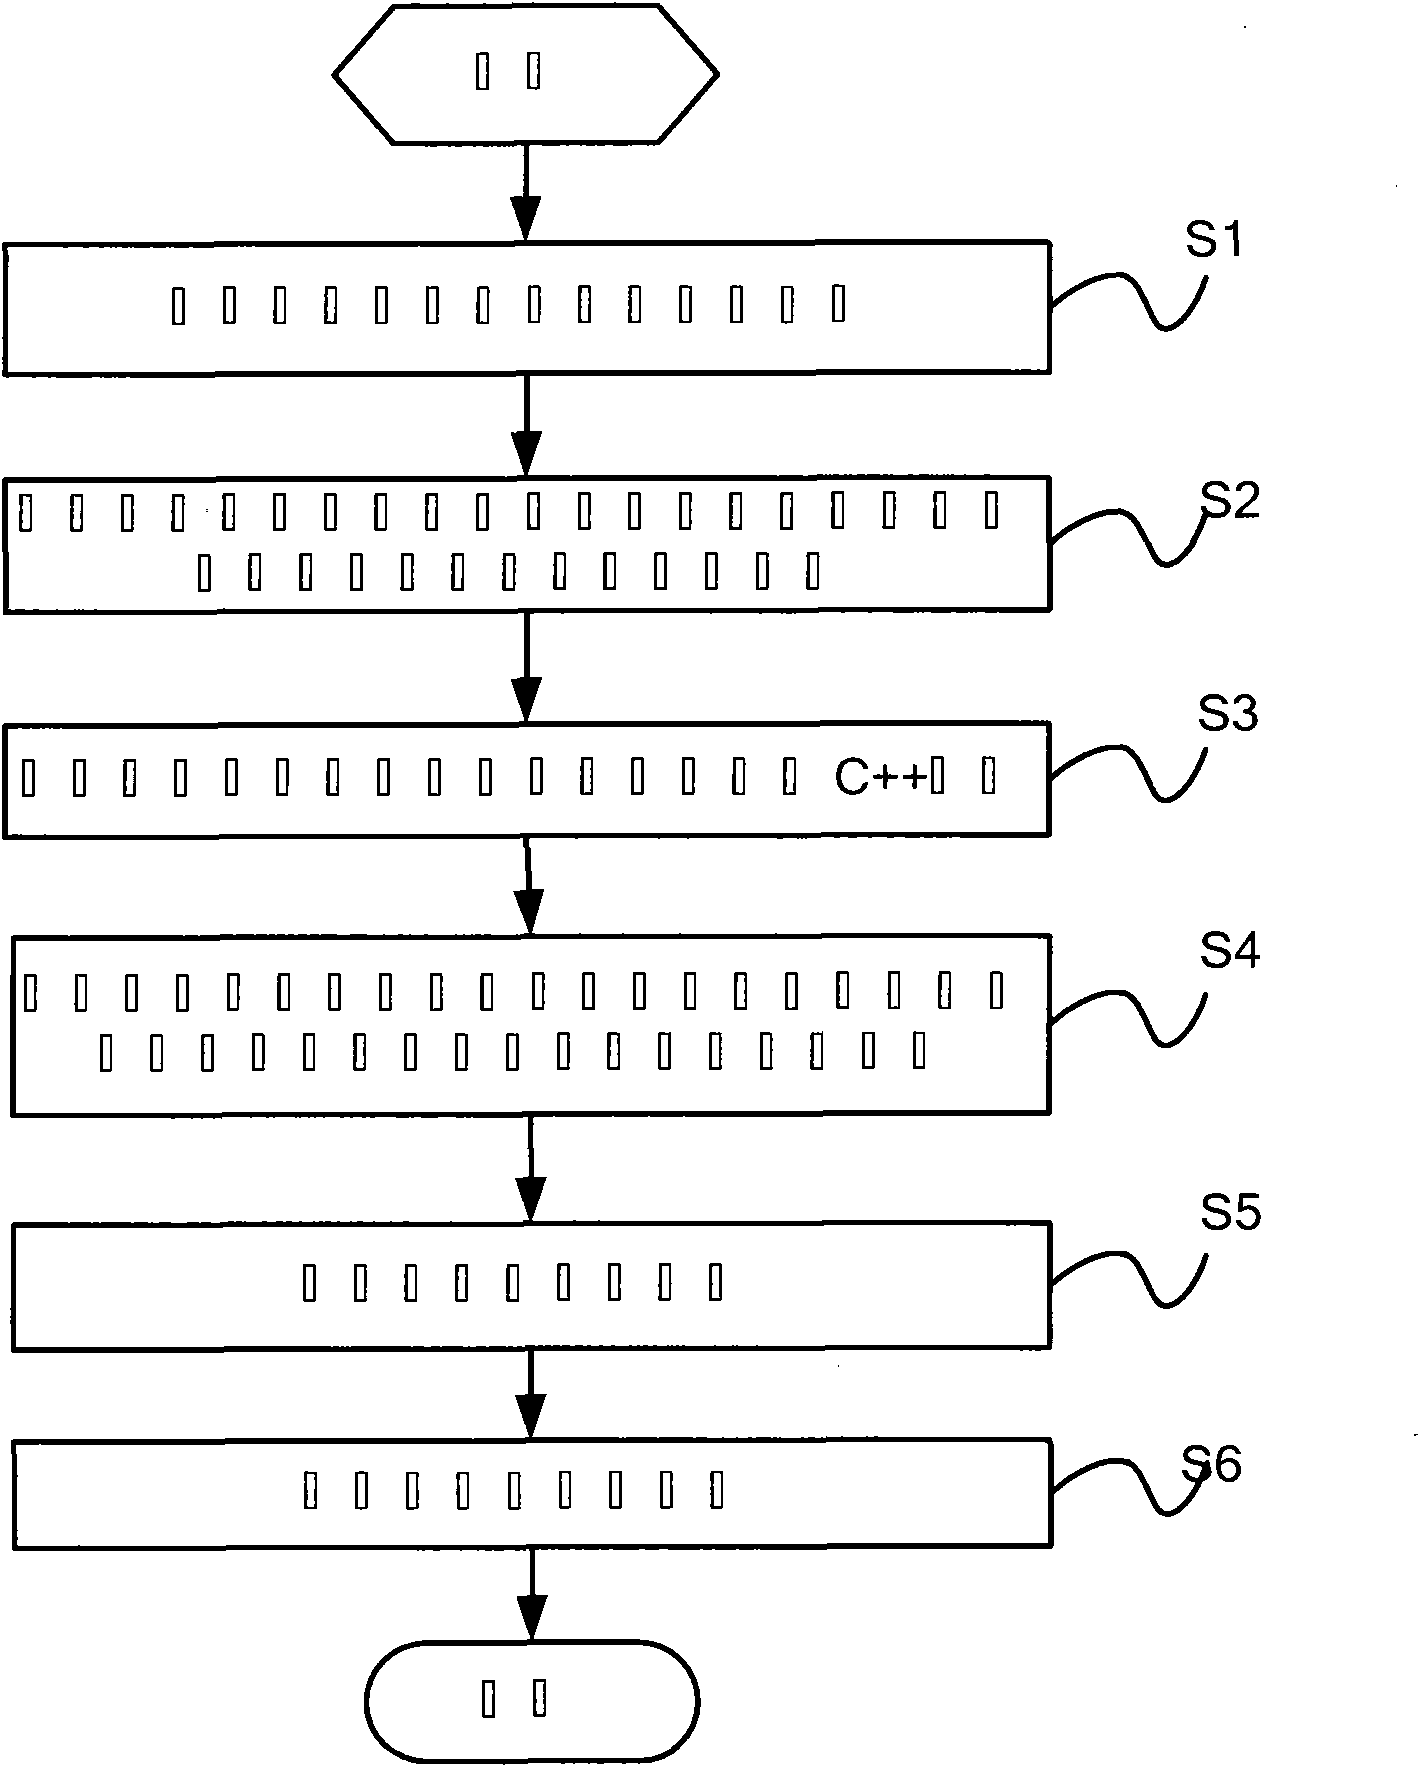 Web application firewall system and application method based on same